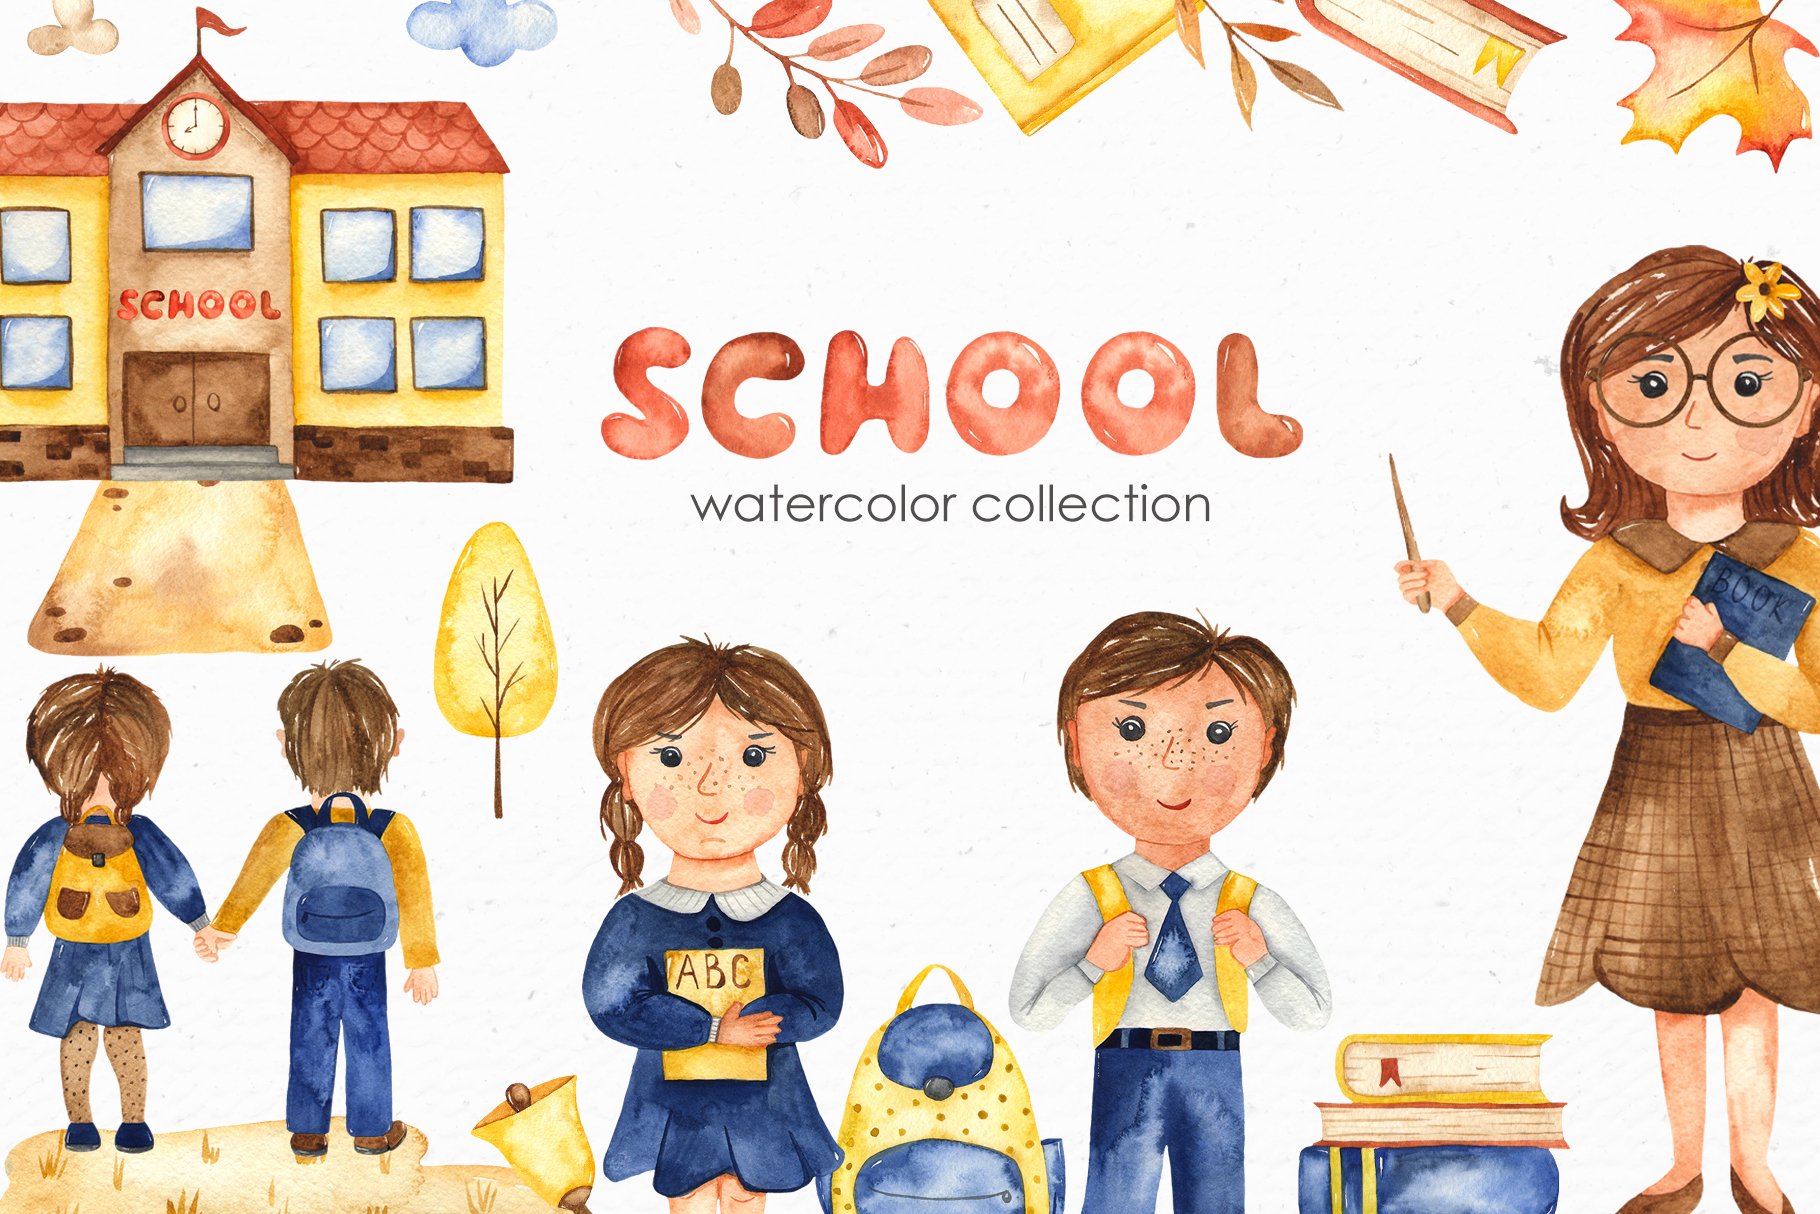 SCHOOL watercolor collection cover image.